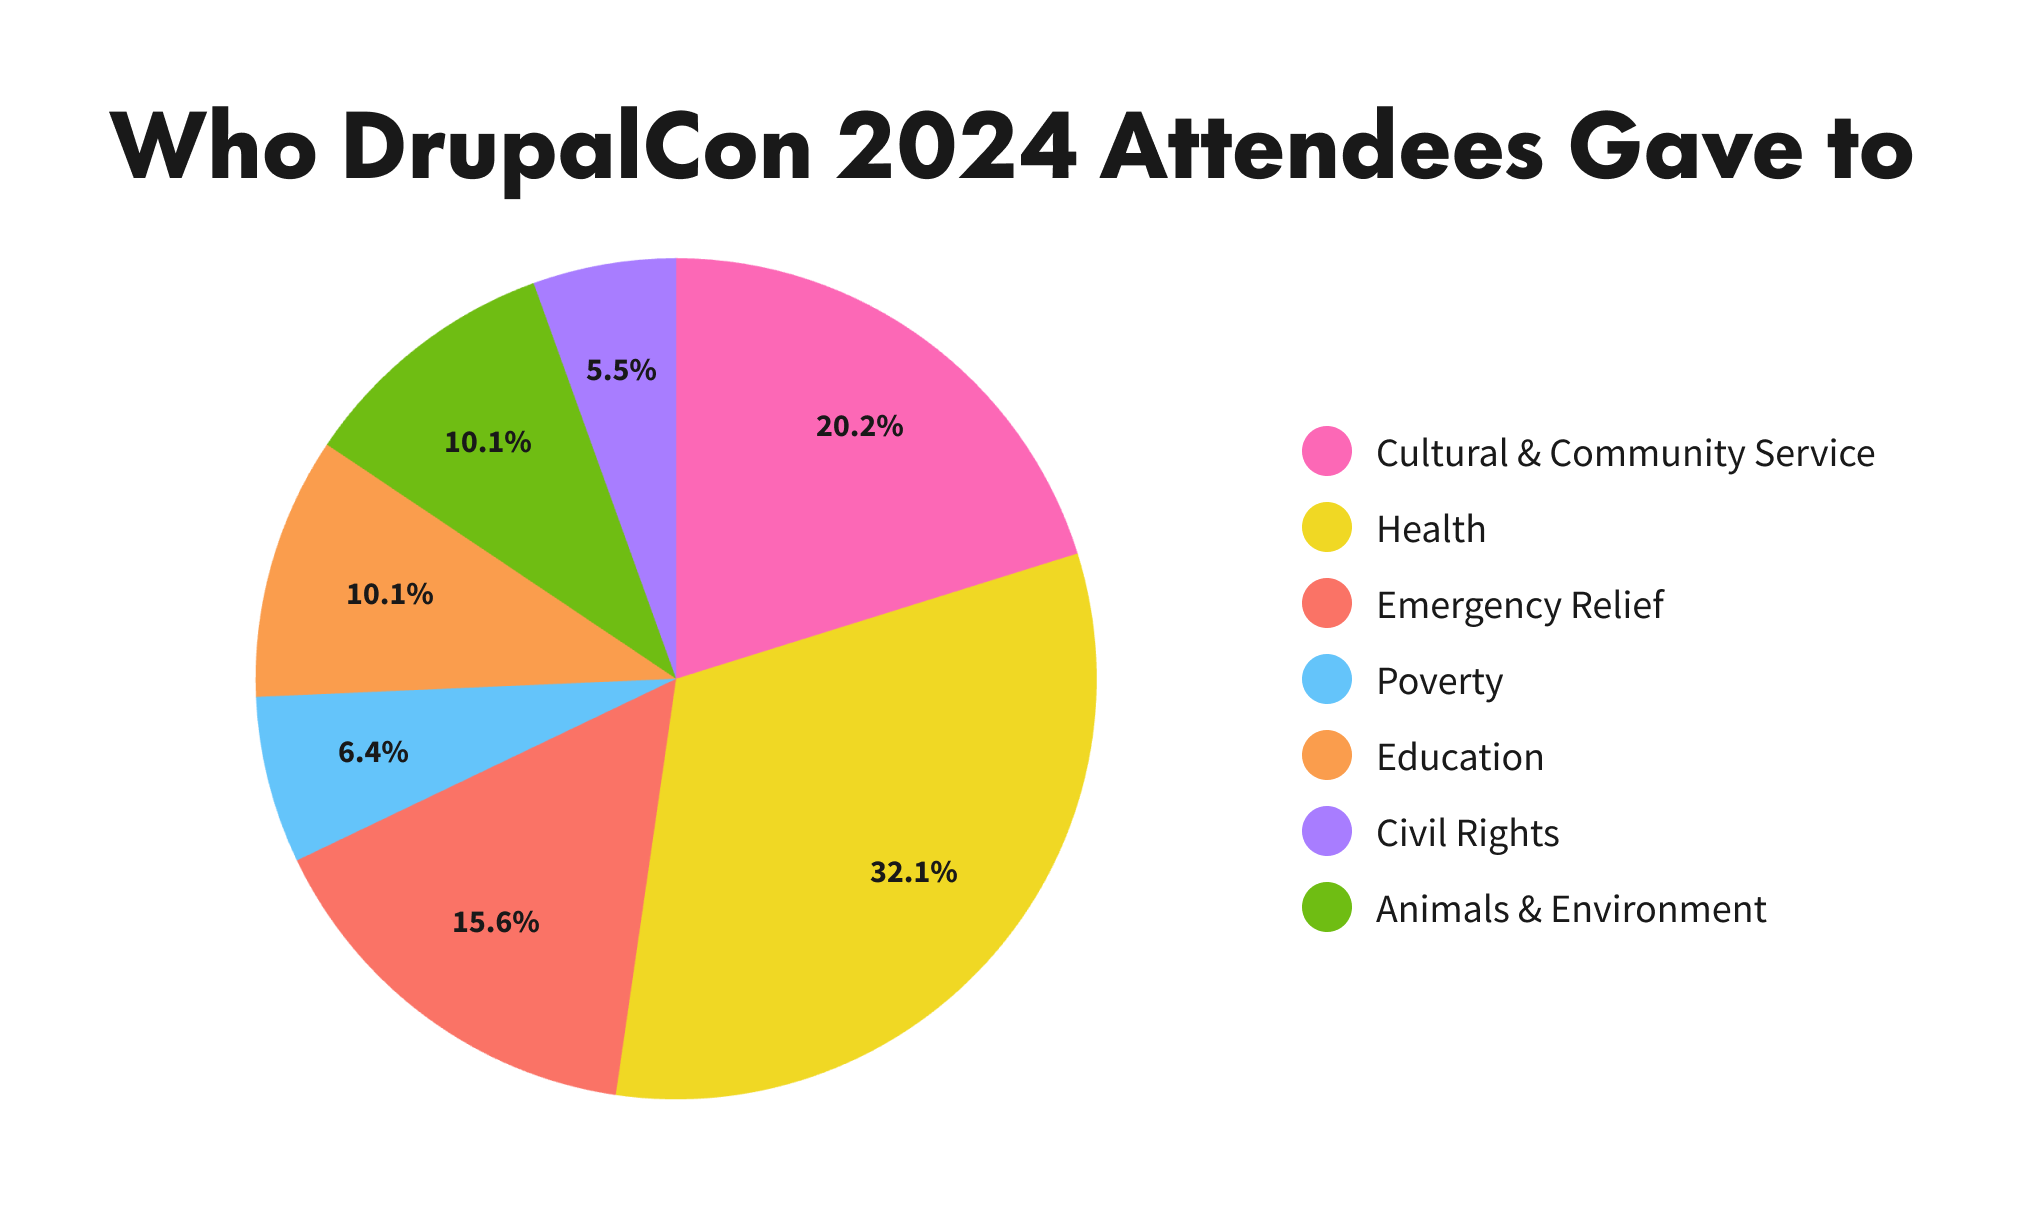 Pie chart depicting who DrupalCon 2024 attendees gave to. A third of attendees gave to a health charity, followed by cultural and community, emergency relief, animals and environment, education, poverty, and civil rights.